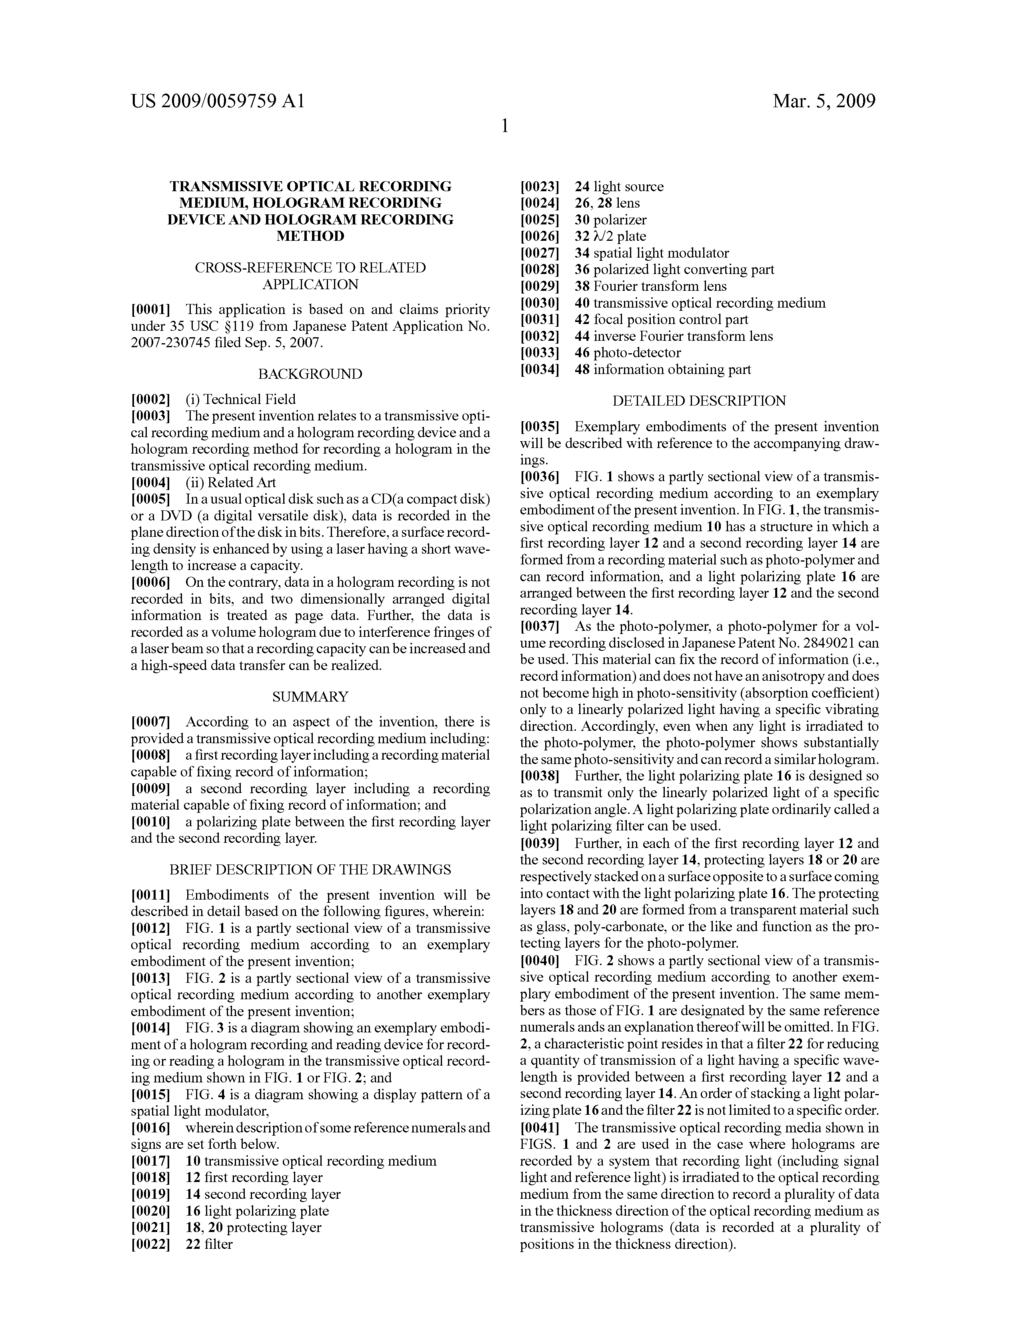 US 2009/0059759 A1 Mar. 5, 2009 TRANSMISSIVE OPTICAL RECORDING MEDIUM, HOLOGRAM RECORDING DEVICE AND HOLOGRAMRECORDING METHOD CROSS-REFERENCE TO RELATED APPLICATION 0001.